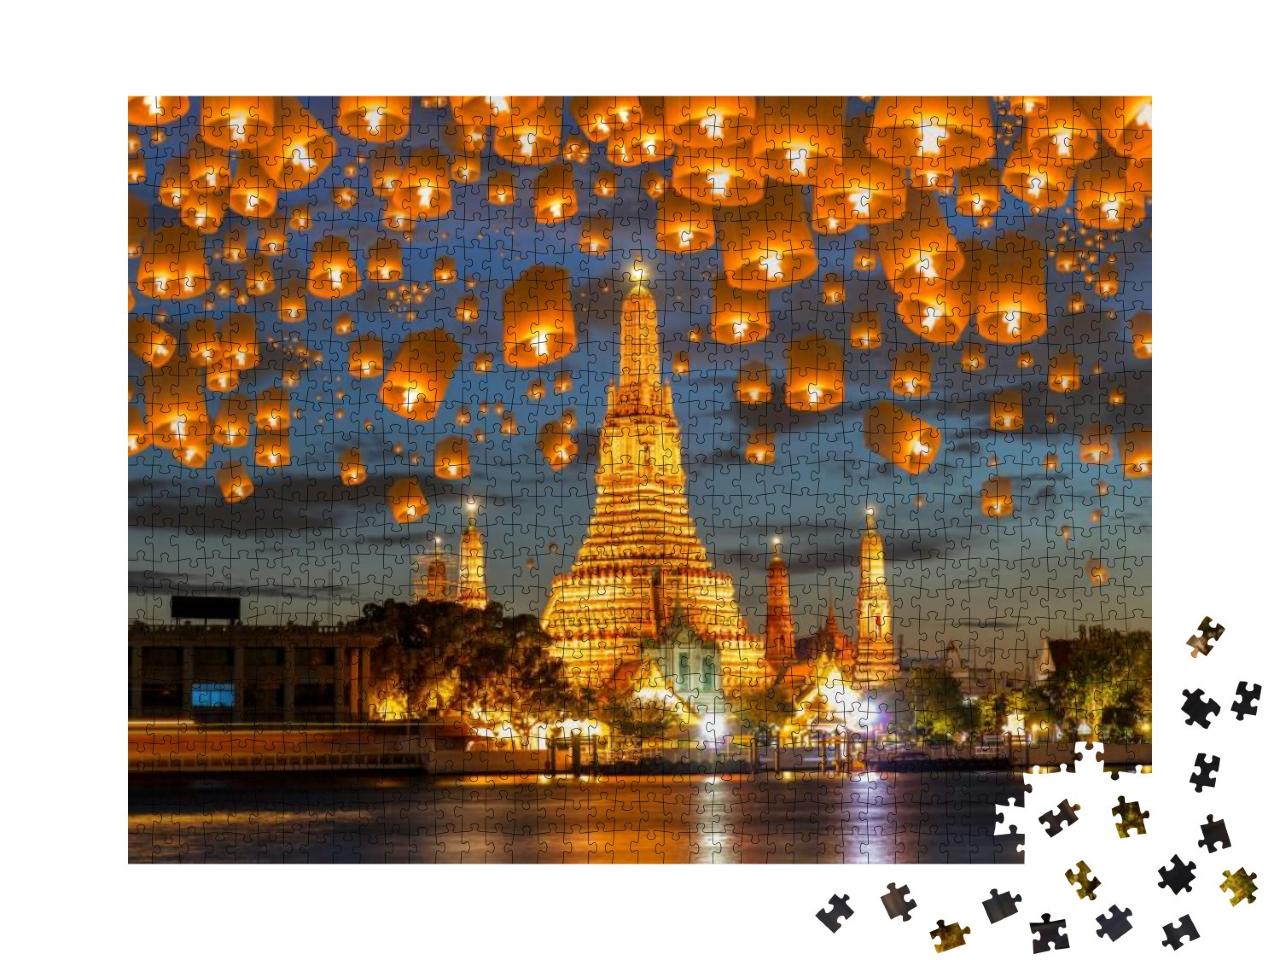 Floating Lamp in Yee Peng Festival Under Loy Krathong Day... Jigsaw Puzzle with 1000 pieces